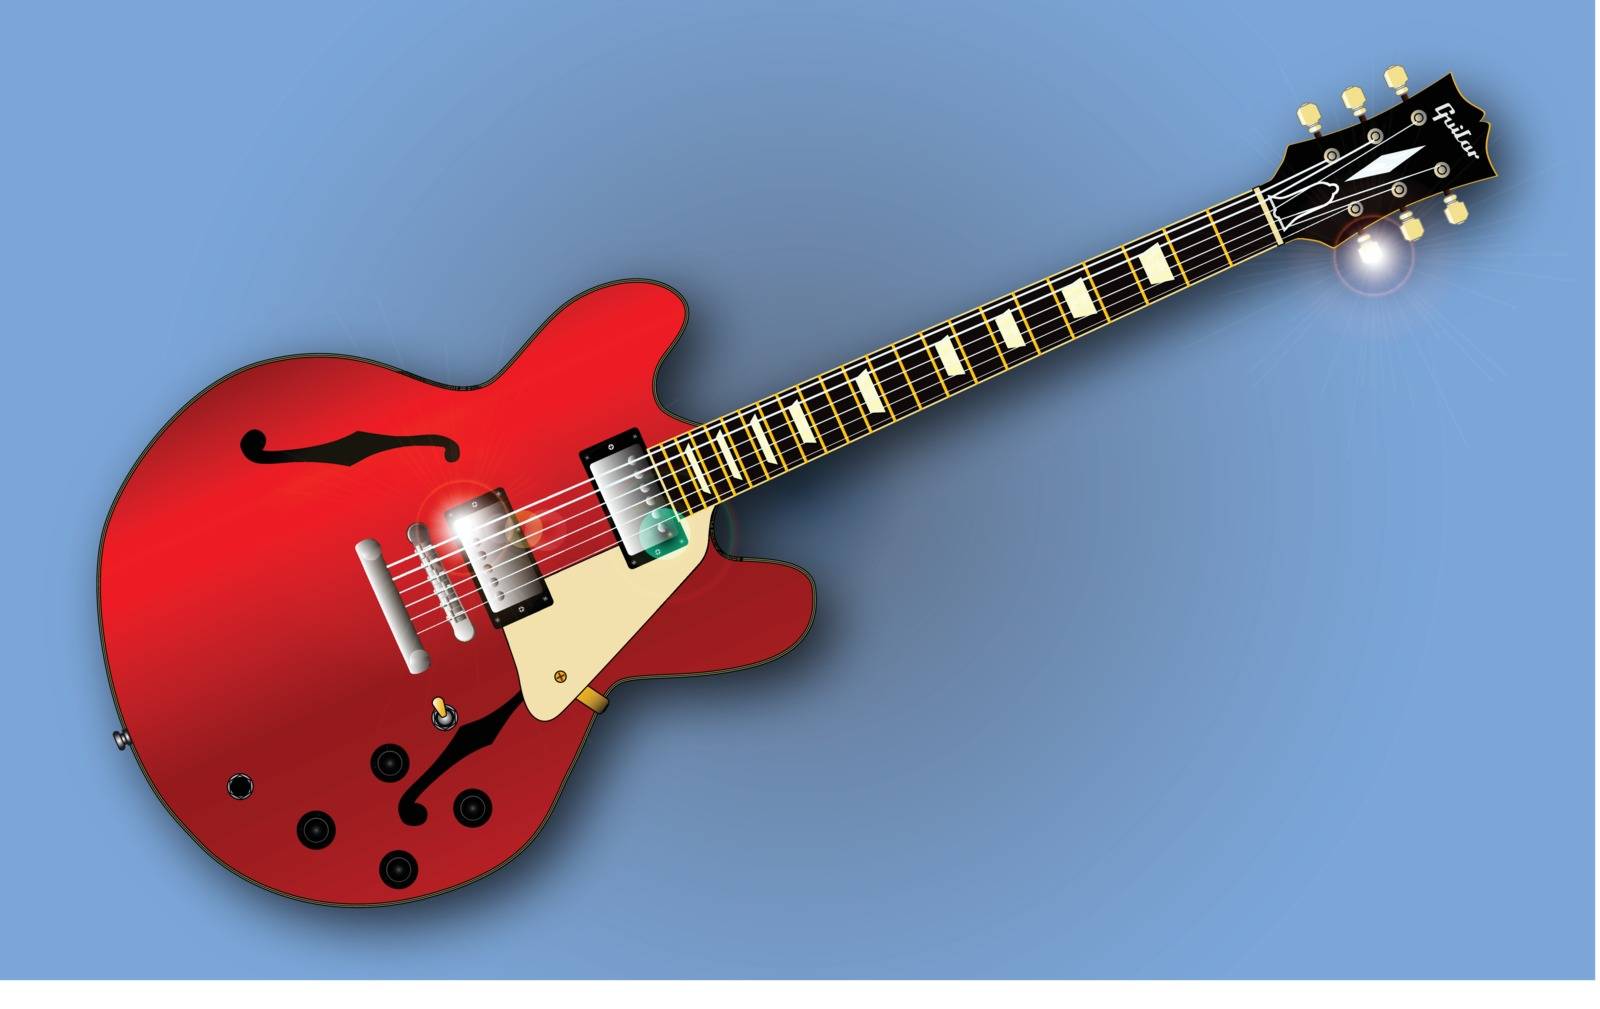 A Gibson ES 335 type guitar set in blue background